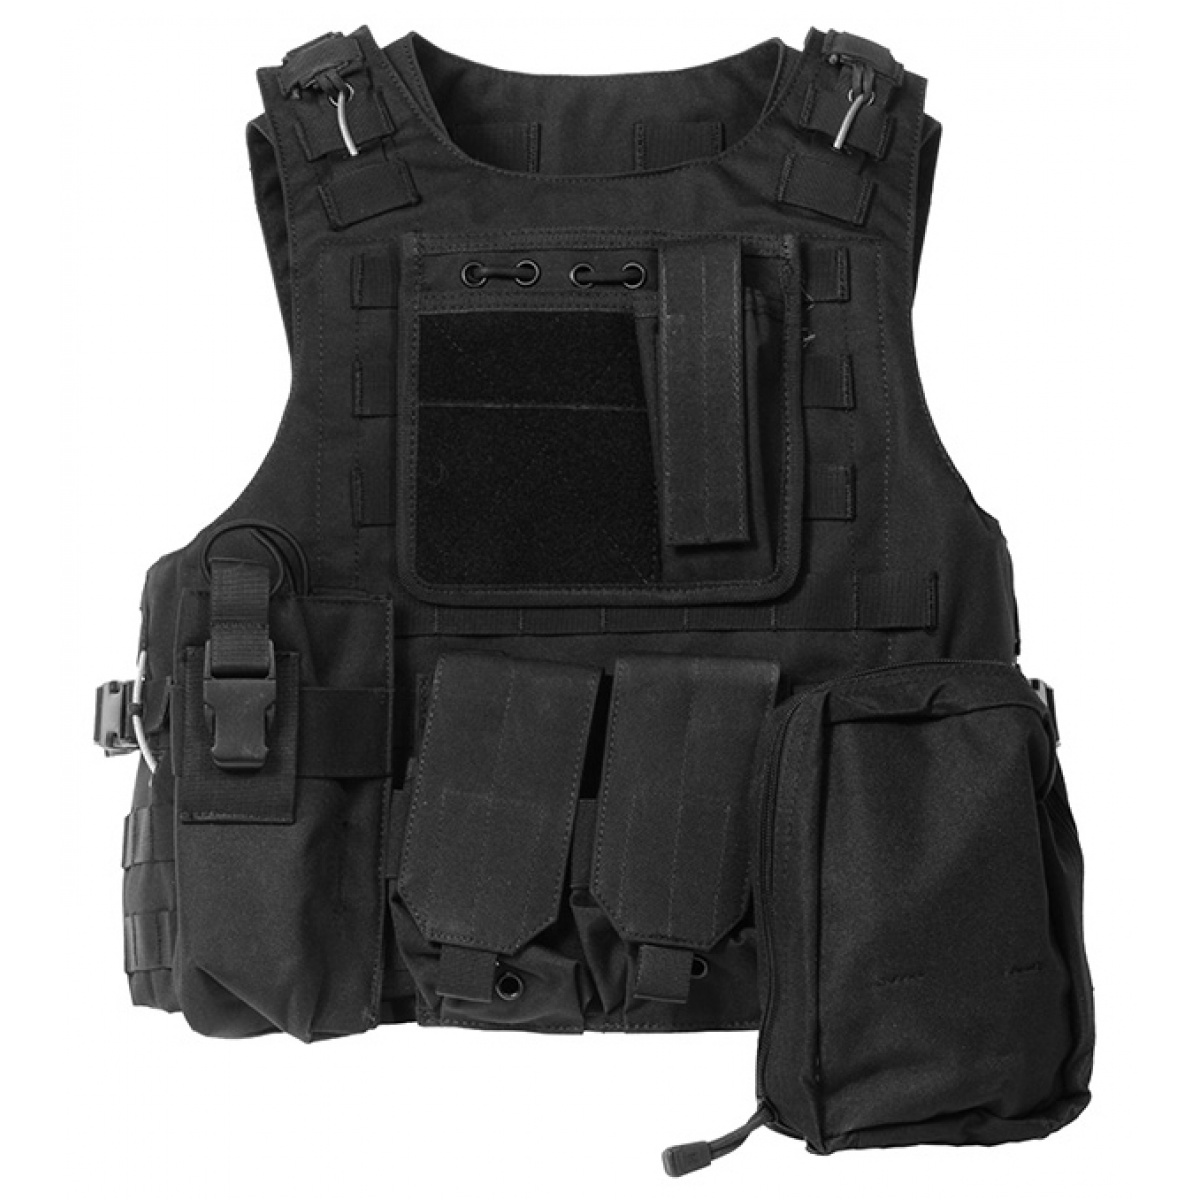 AMA Airsoft MOLLE Plate Carrier w/ 6 Pouches - BLACK | Airsoft Megastore